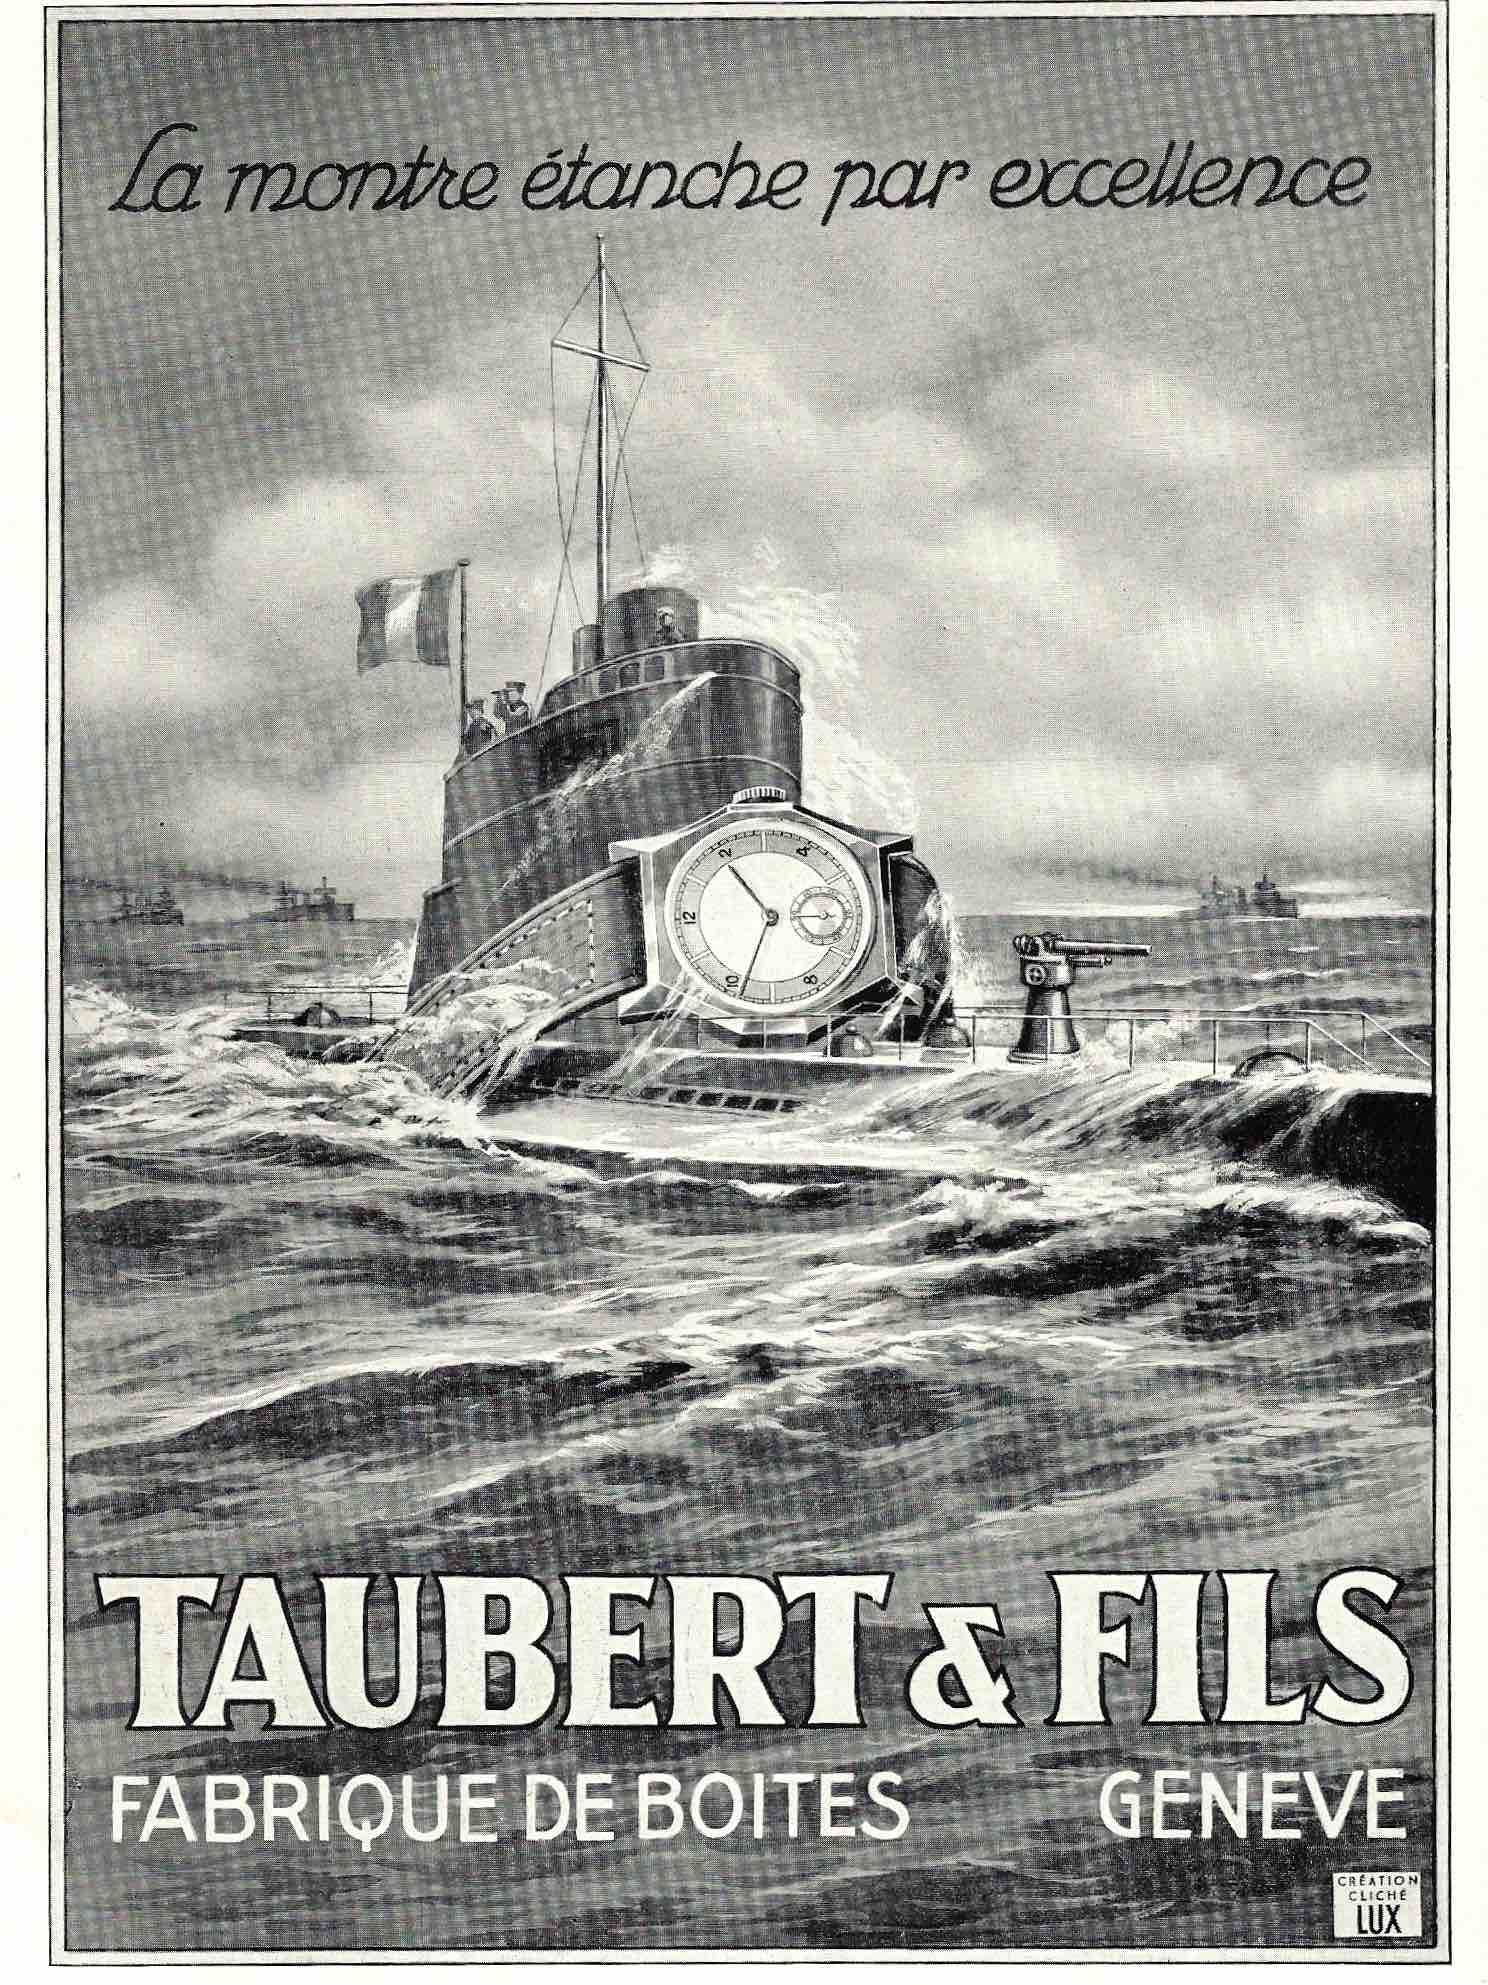 Taubert & Fils advert from 1939 in Borgel – The Master Casemaker you Haven’t Heard Of for A Collected Man London